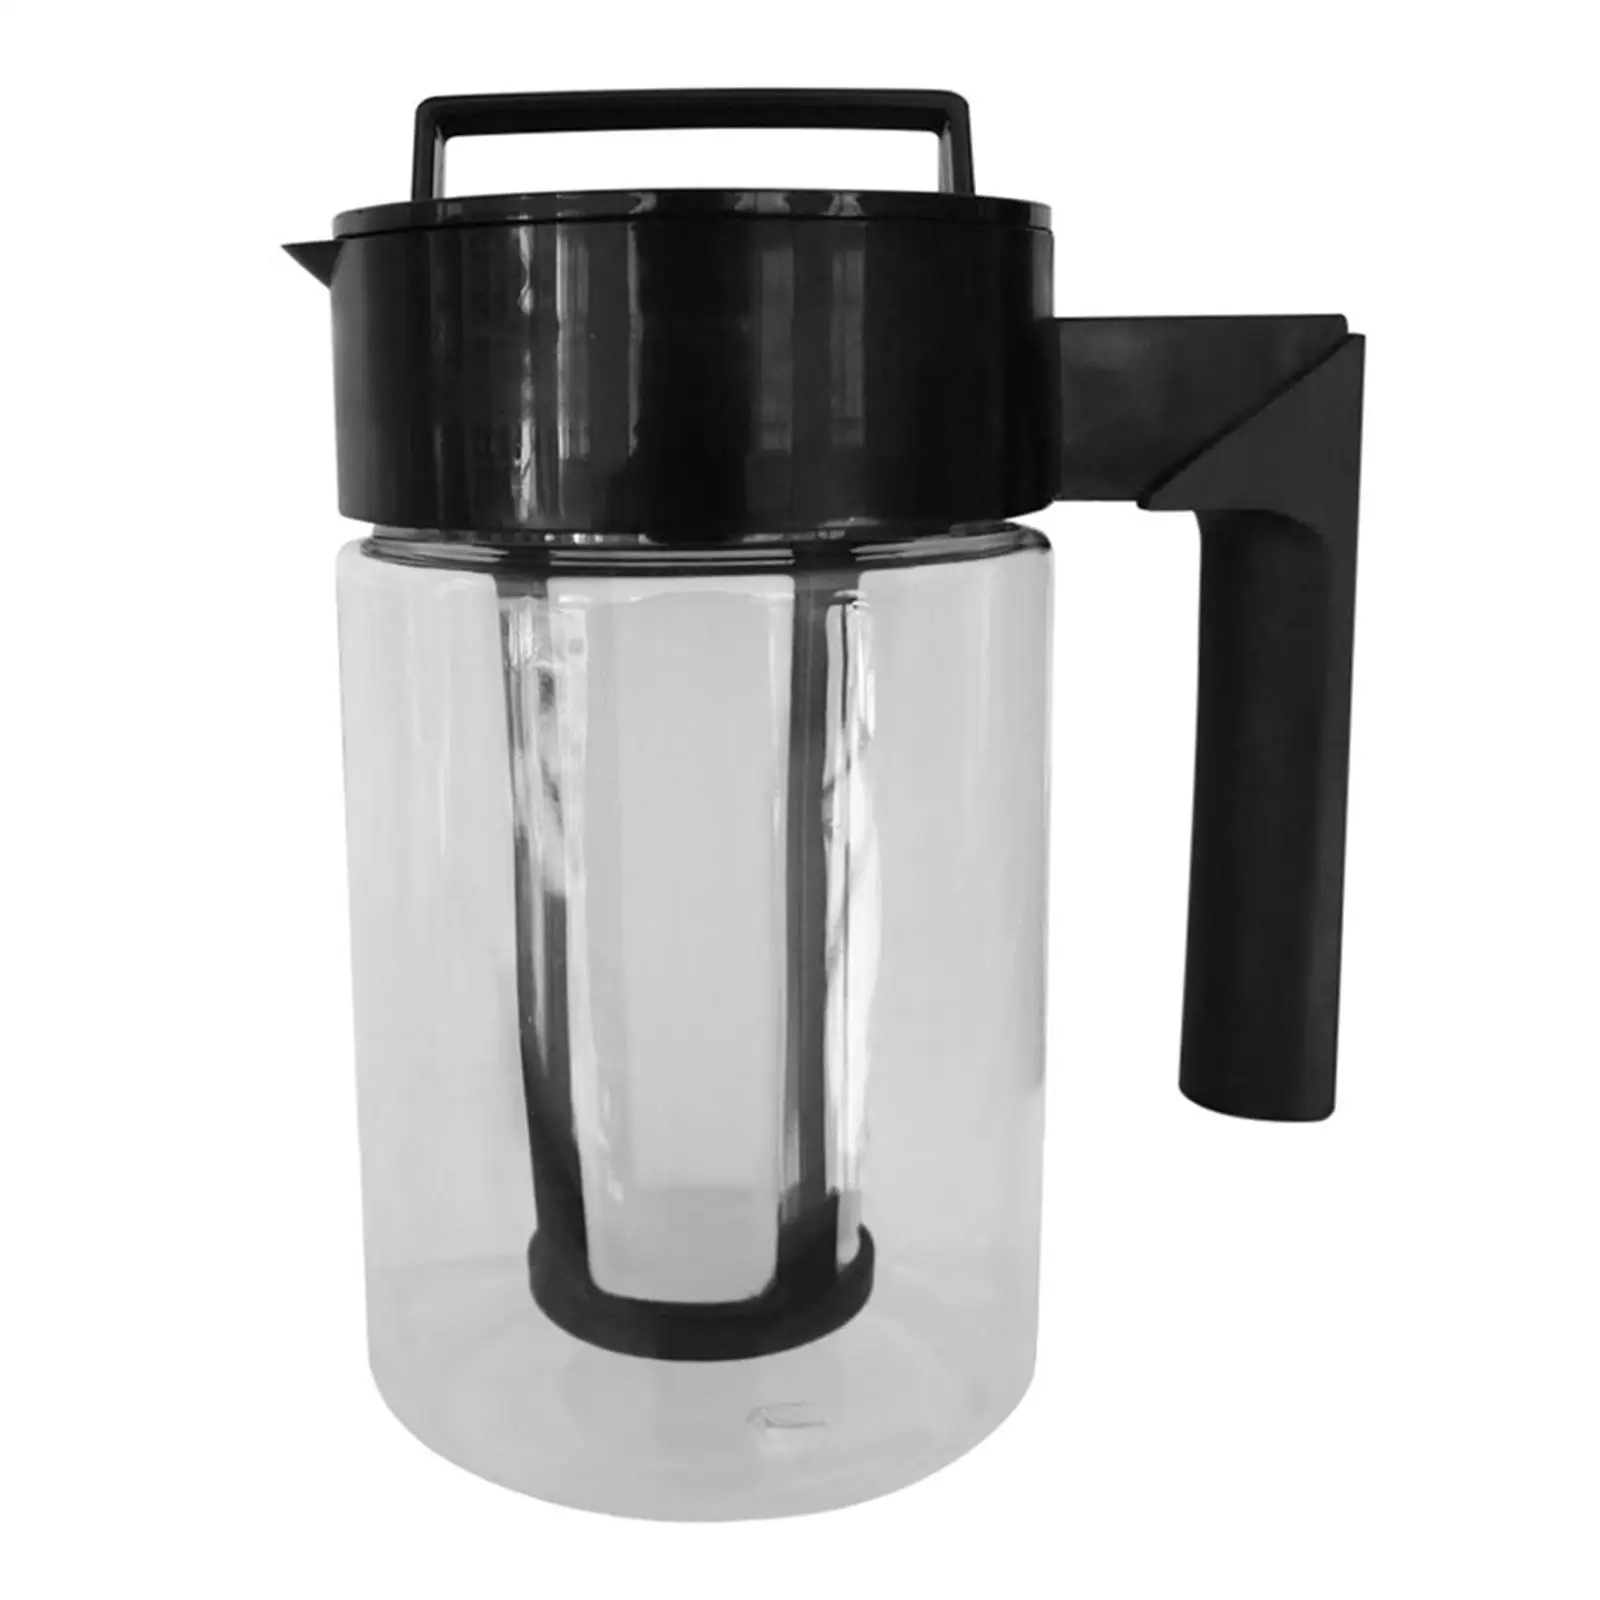 Portable Cold Tea Brewing Coffee Maker Milk Iced Tea Maker Reusable Bottle Coffee Kettle Juice Coffee Decanter for Home